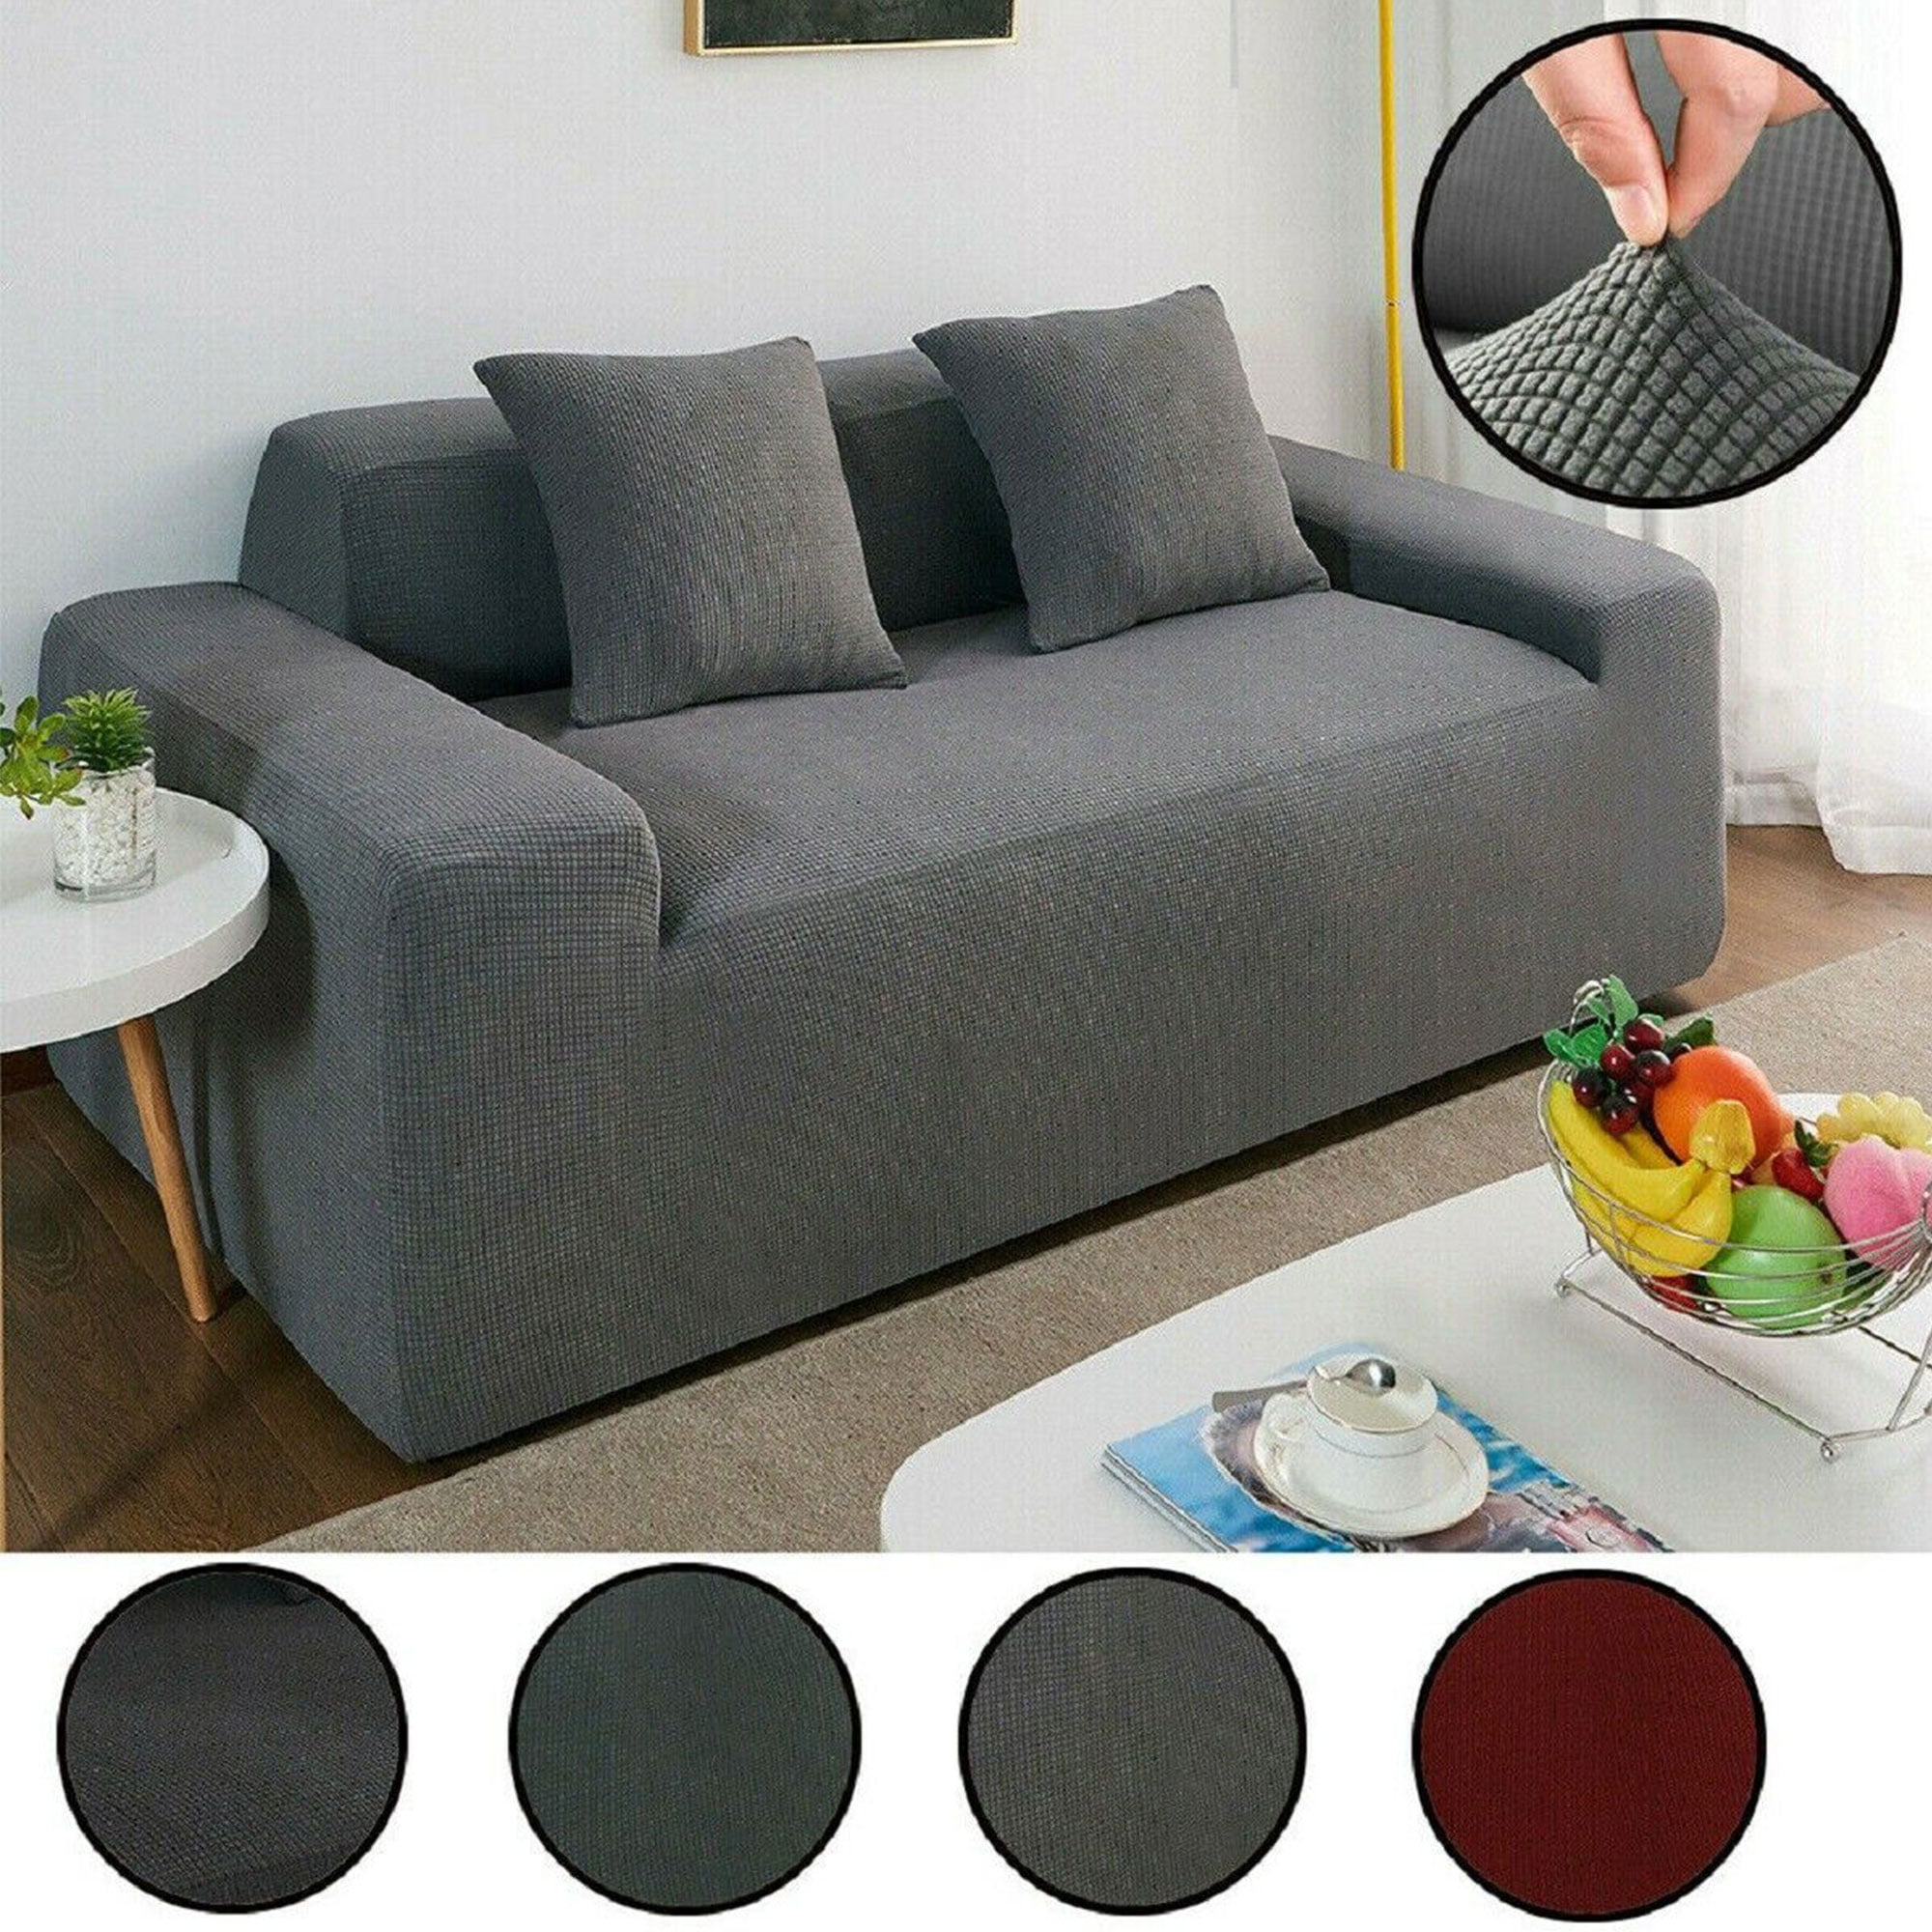 2/3/4 Knitted Stretch Chair Sofa Covers Couch Cover Elastic Slipcover Protector 